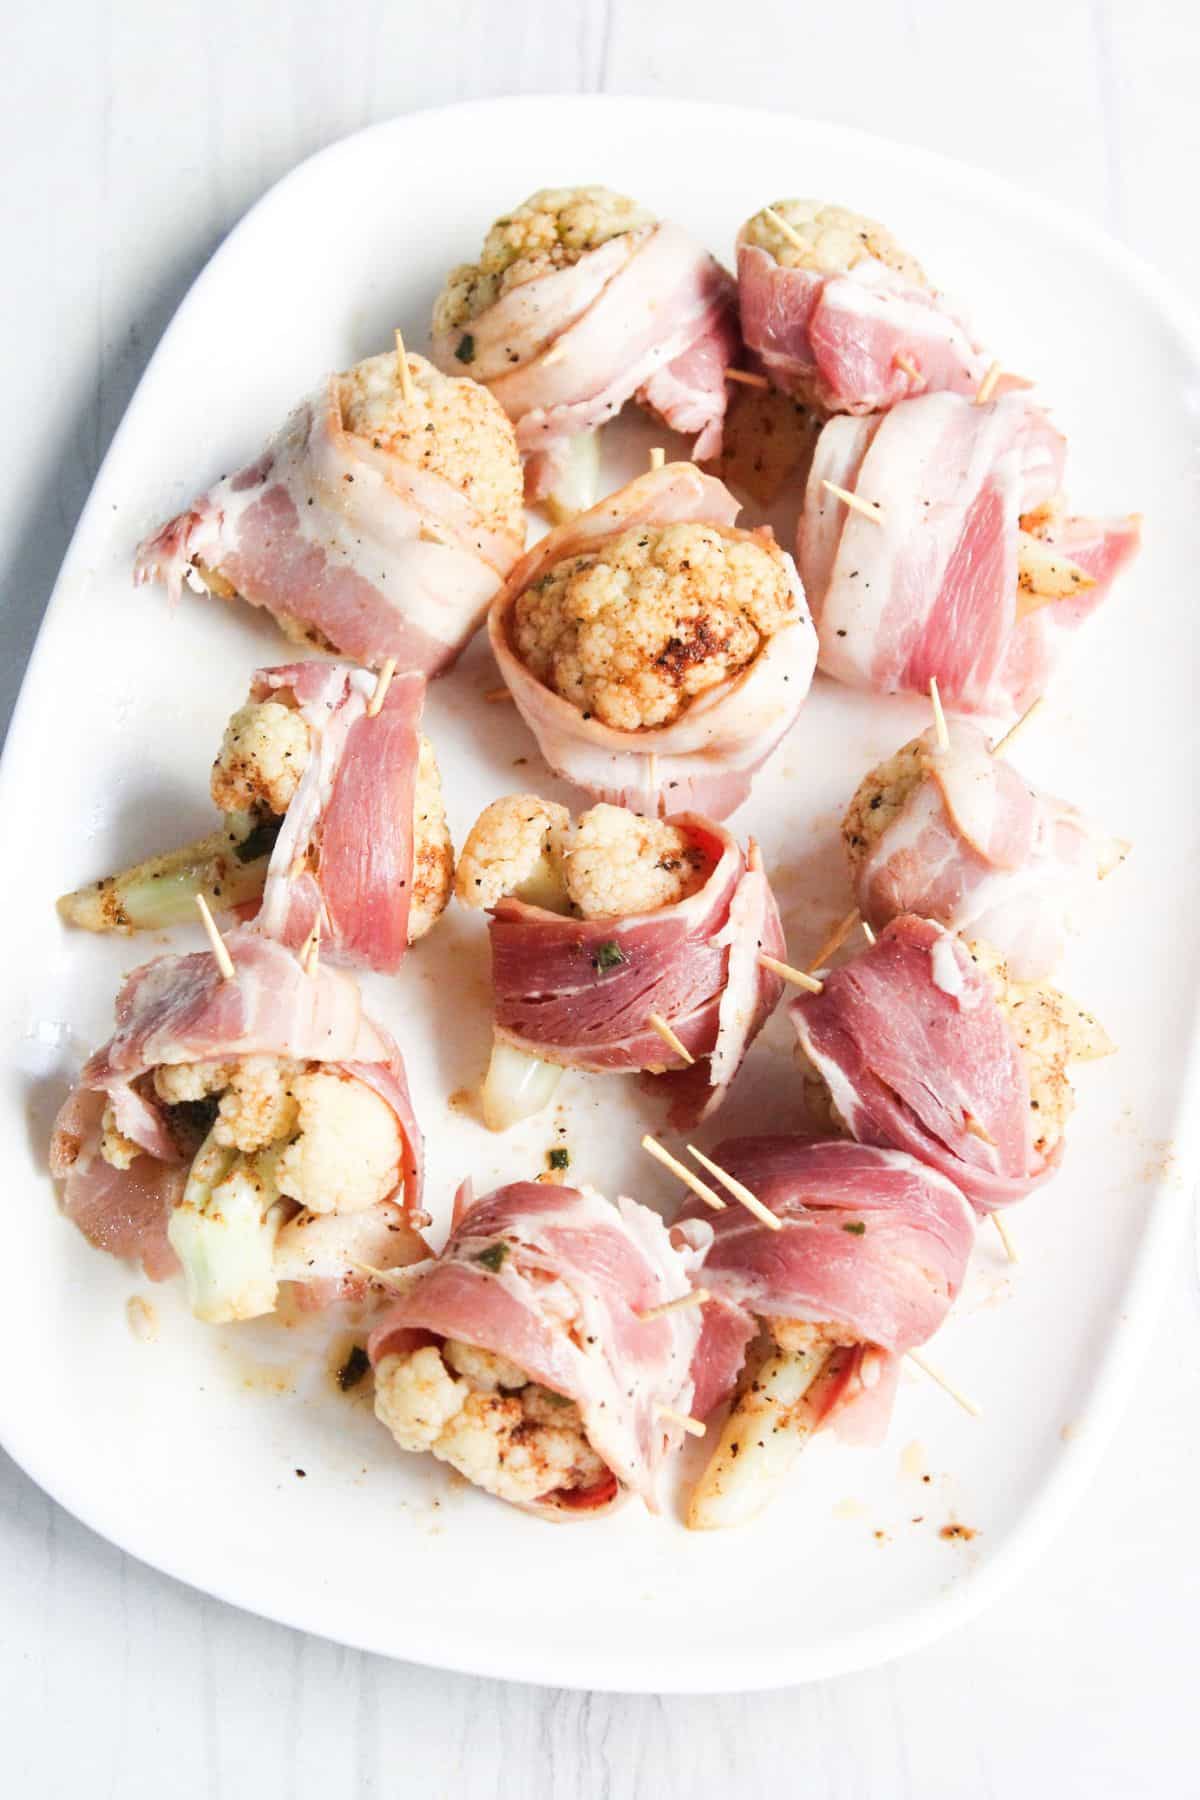 bacon wrapped on cauliflower